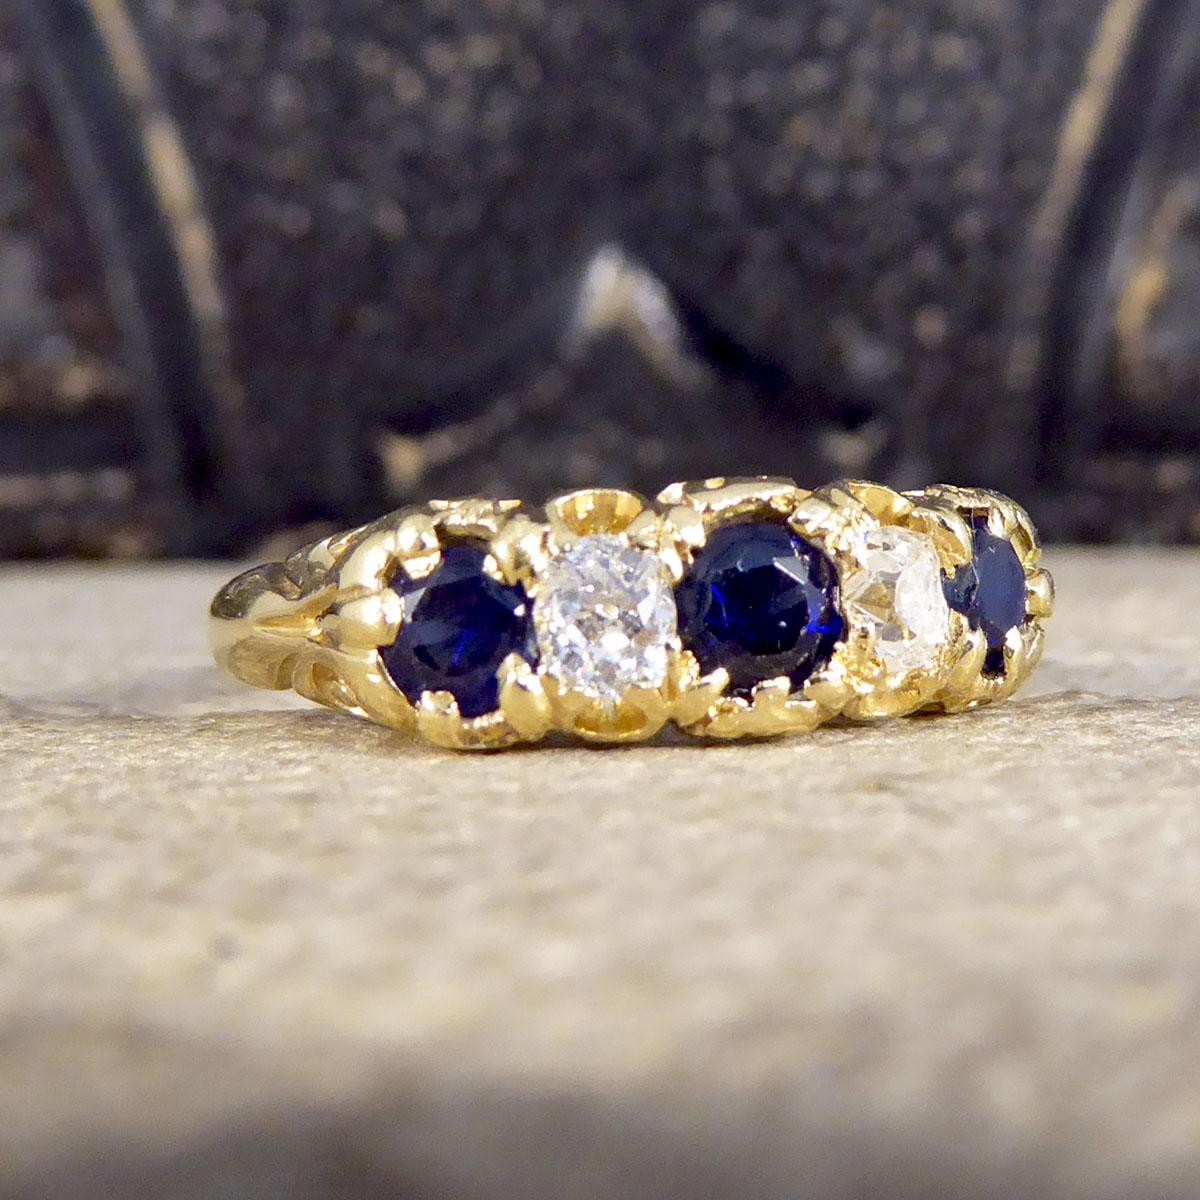 This lovely antique ring was created in the Late Victorian era with a beautifully detailed 18ct Yellow Gold gallery and carved shoulders. It holds three sparkling deep blue Sapphires weighing approximately 0.62ct in total and two smaller Old